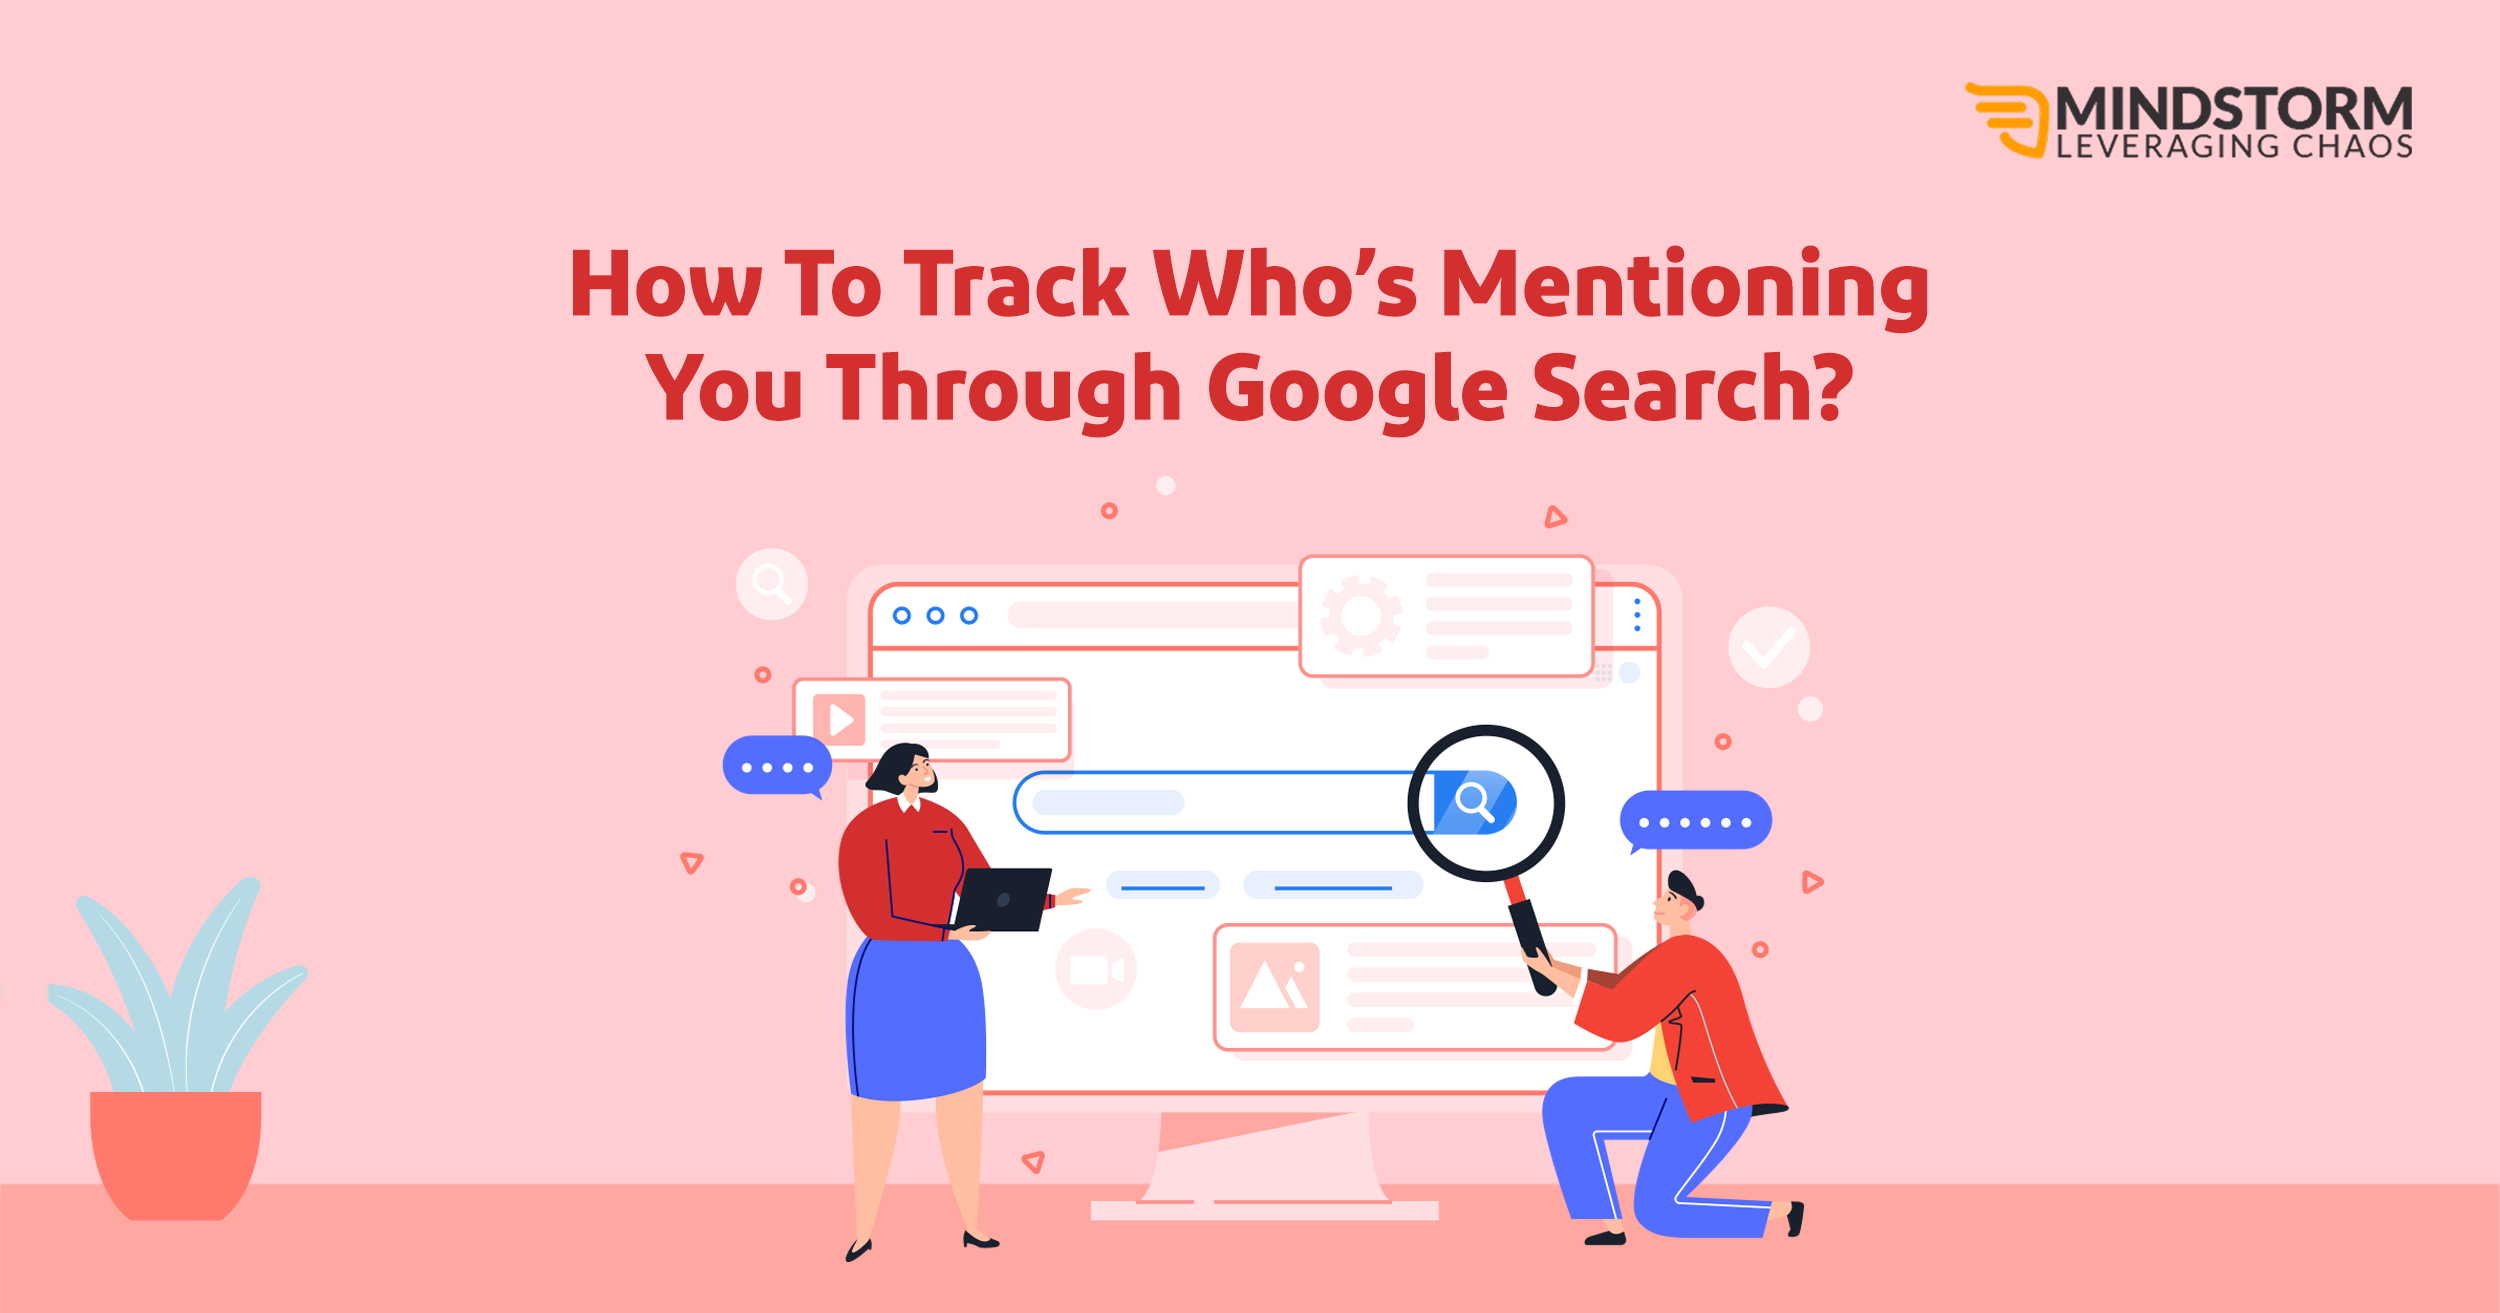 How To Track Who’s Mentioning You Through Google Search?